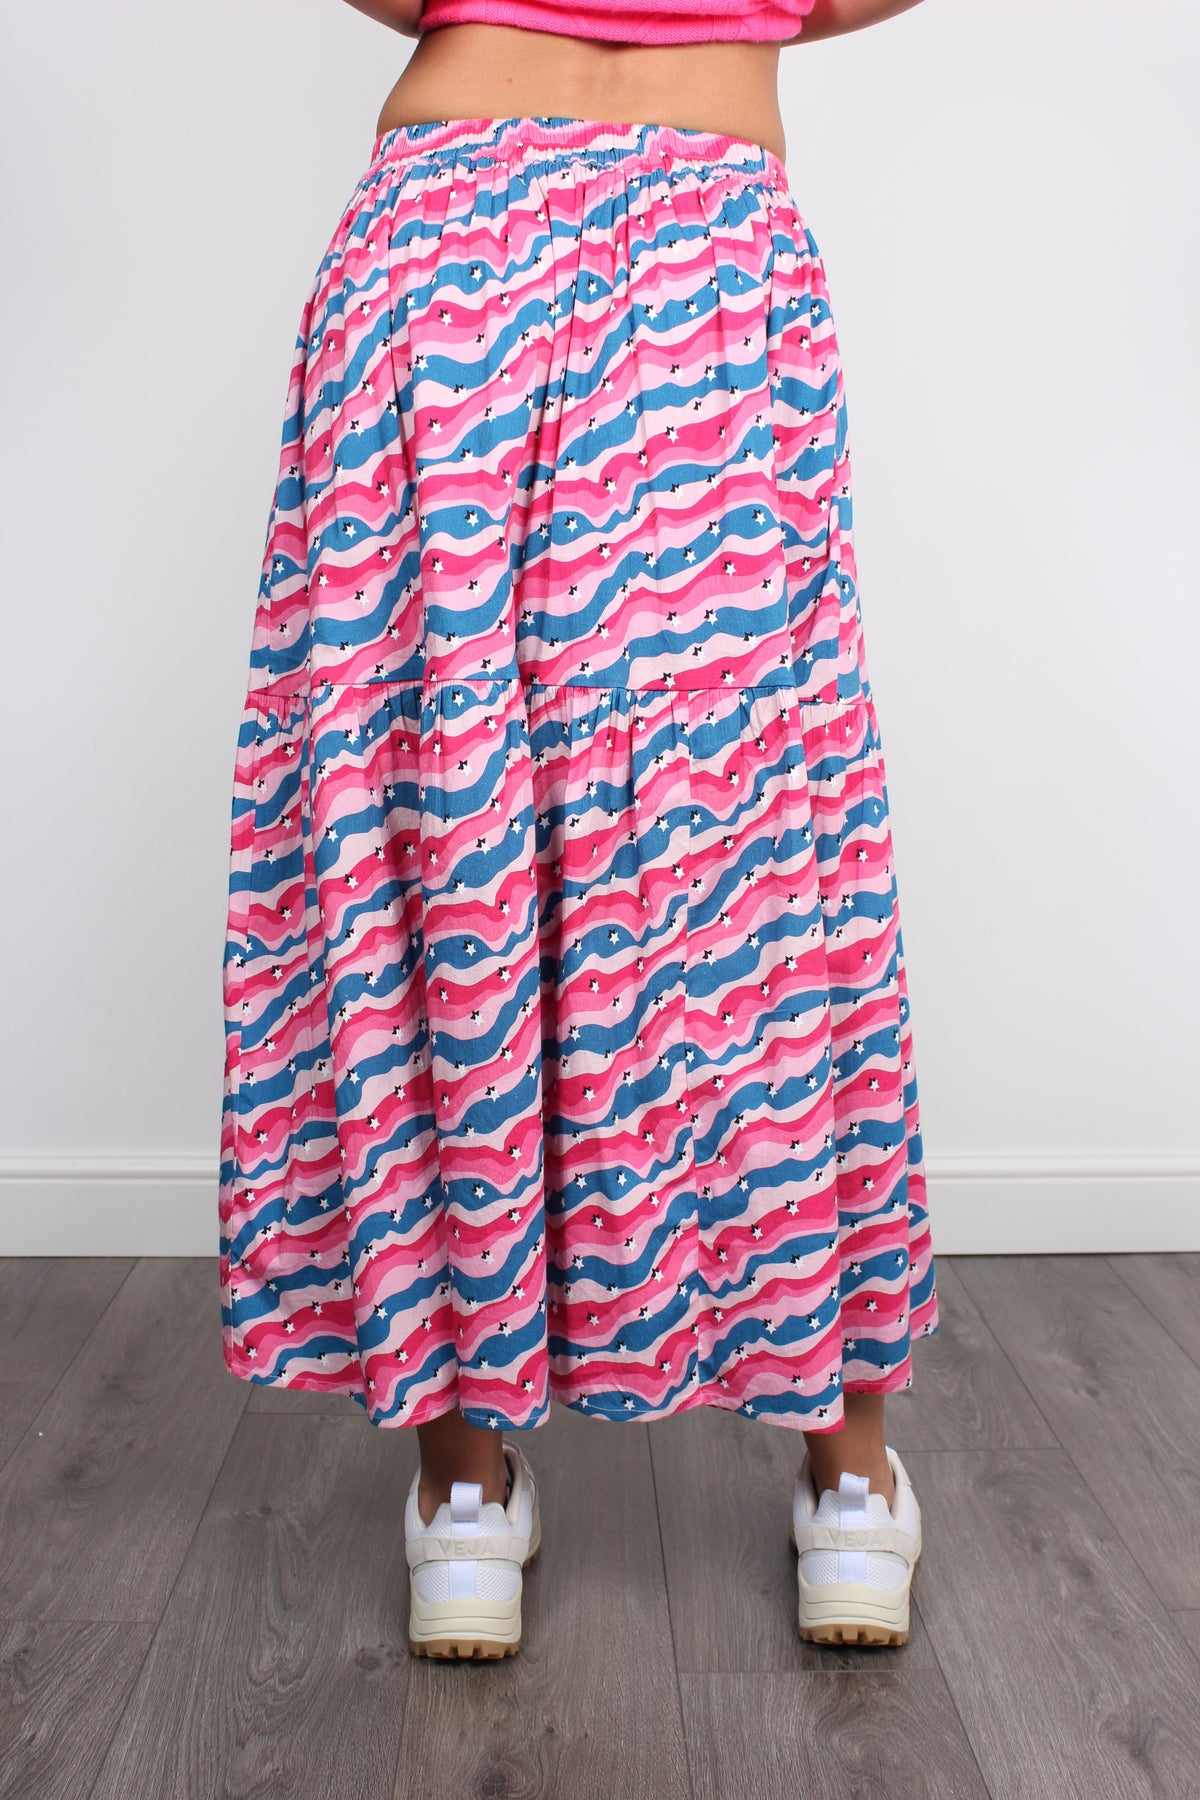 PPL Lea Skirt in Squiggle Star 01 in Pink & Blue